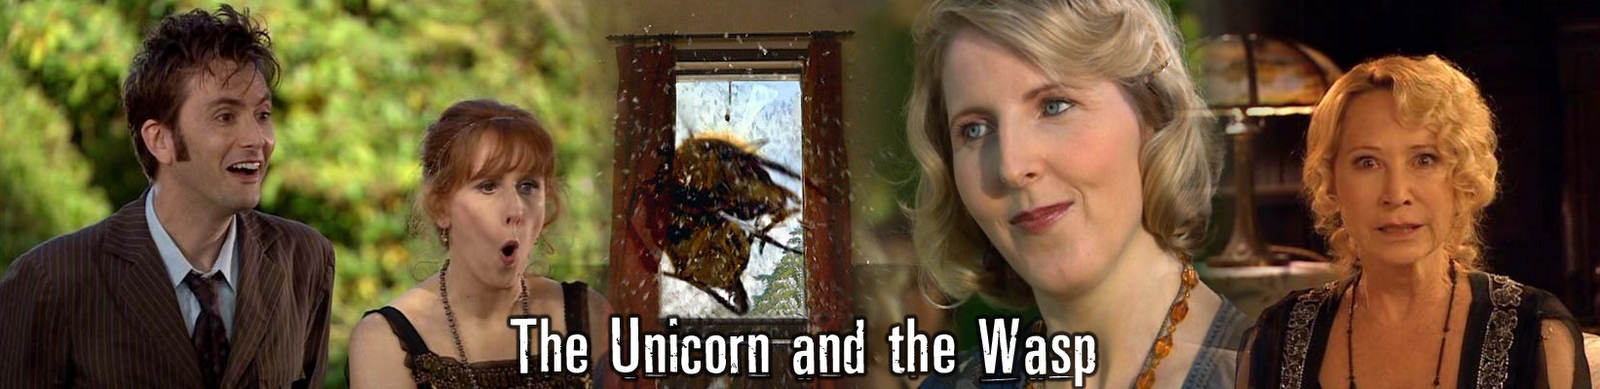 [The+Unicorn+and+the+Wasp+tonight.png]